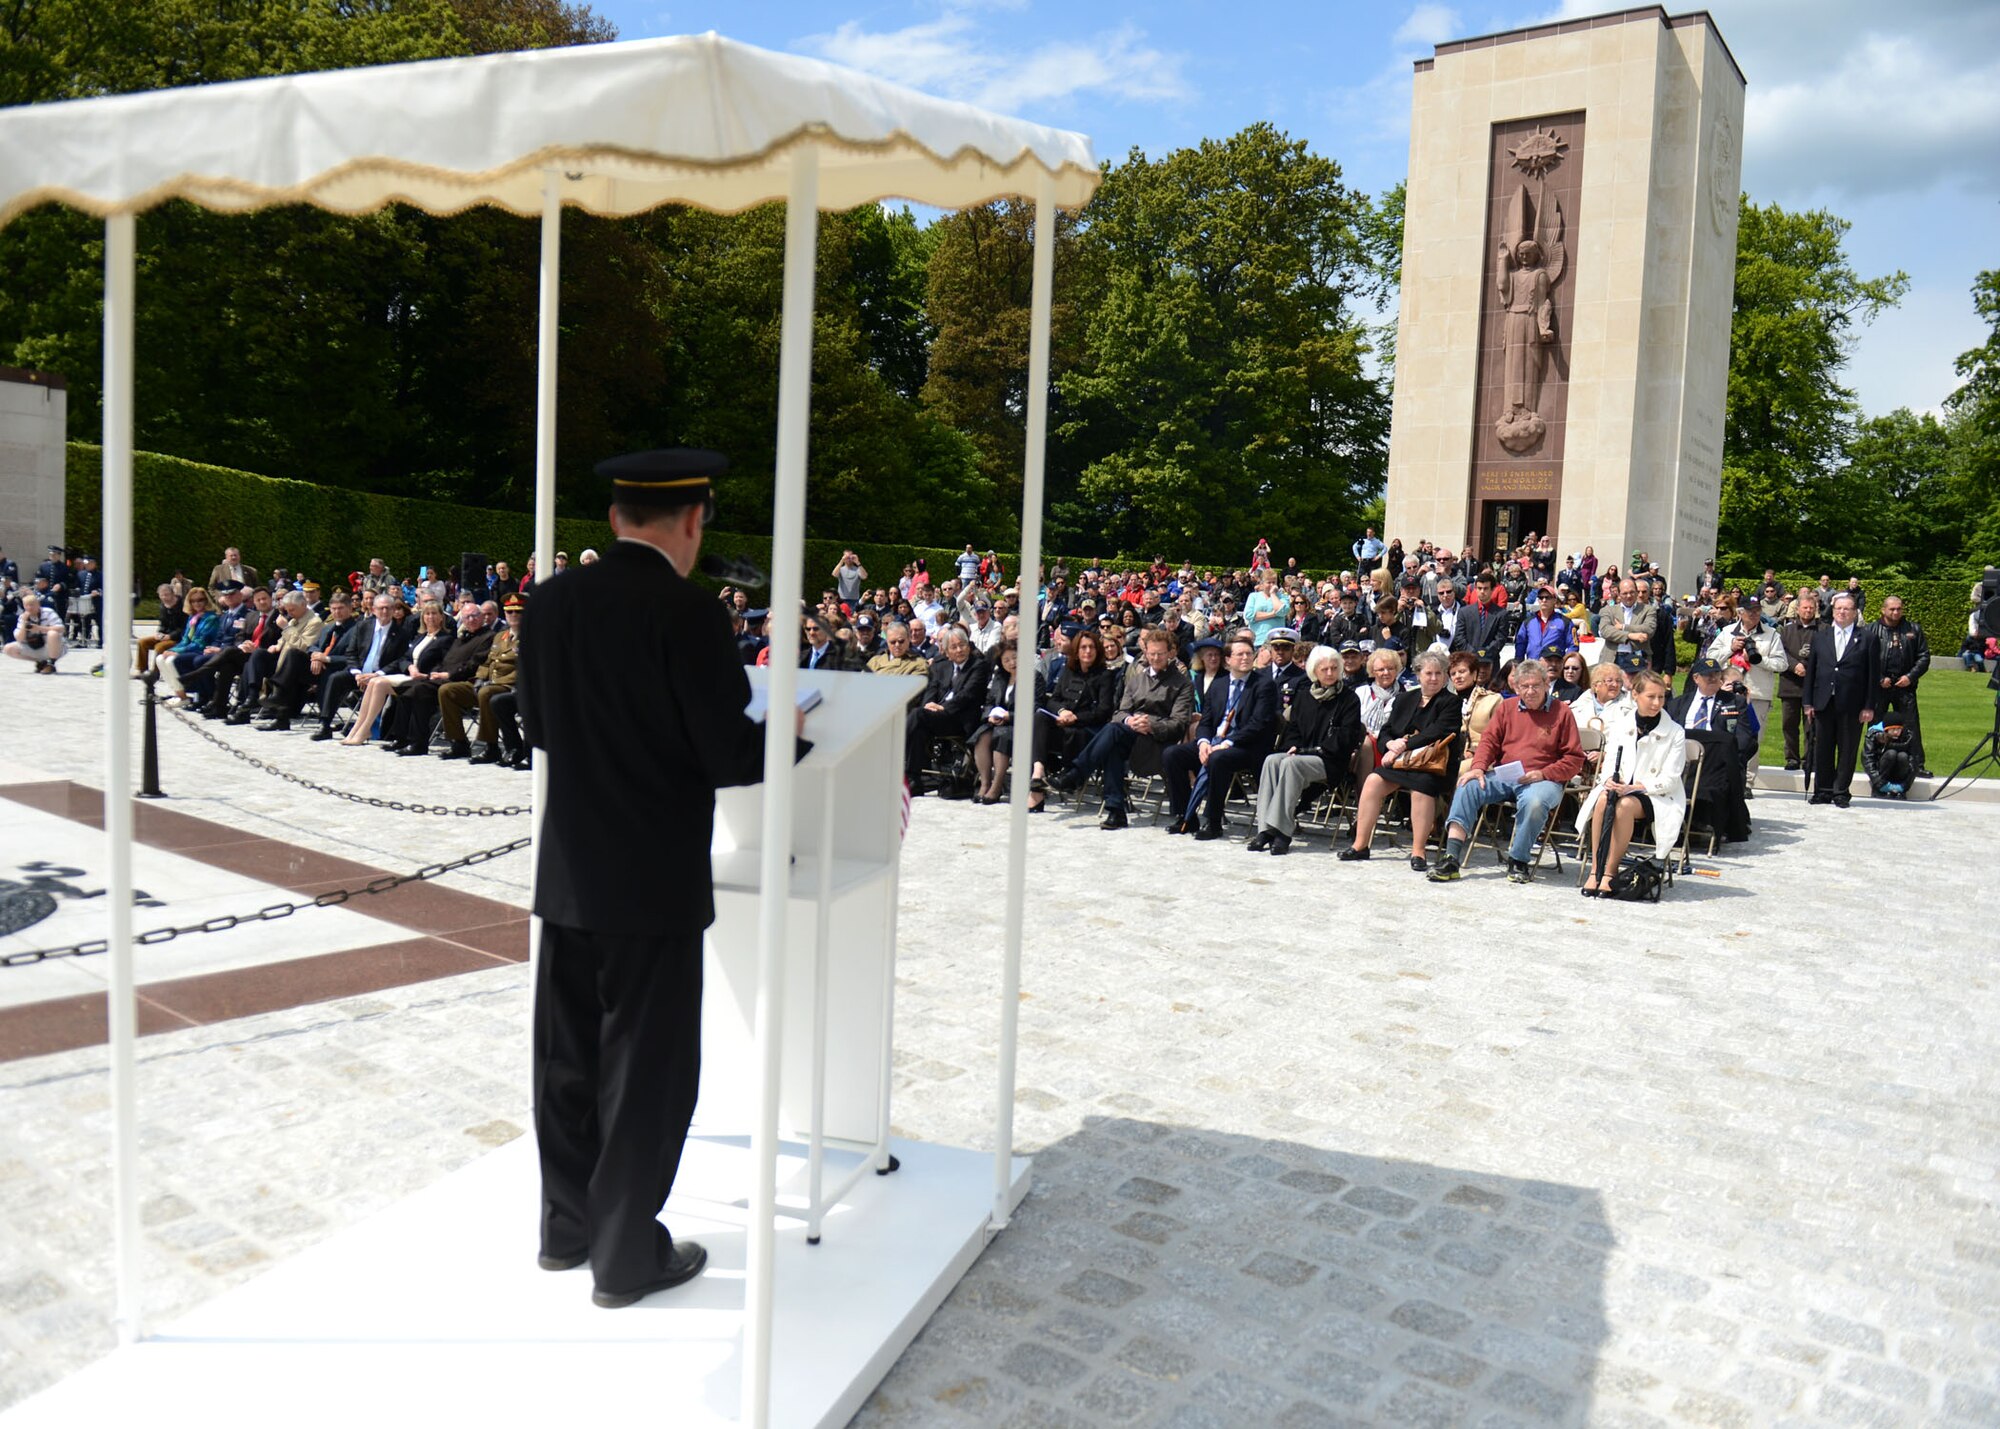 LUXEMBOURG – People listen to opening remarks during a Memorial Day commemoration at the Luxembourg American Military Cemetery and Memorial May 25, 2013. The cemetery contains the remains of more than 5,000 American service members, most who died during the Battle of the Bulge fought nearby. (U.S. Air Force photo by Airman 1st Class Gustavo Castillo/Released)